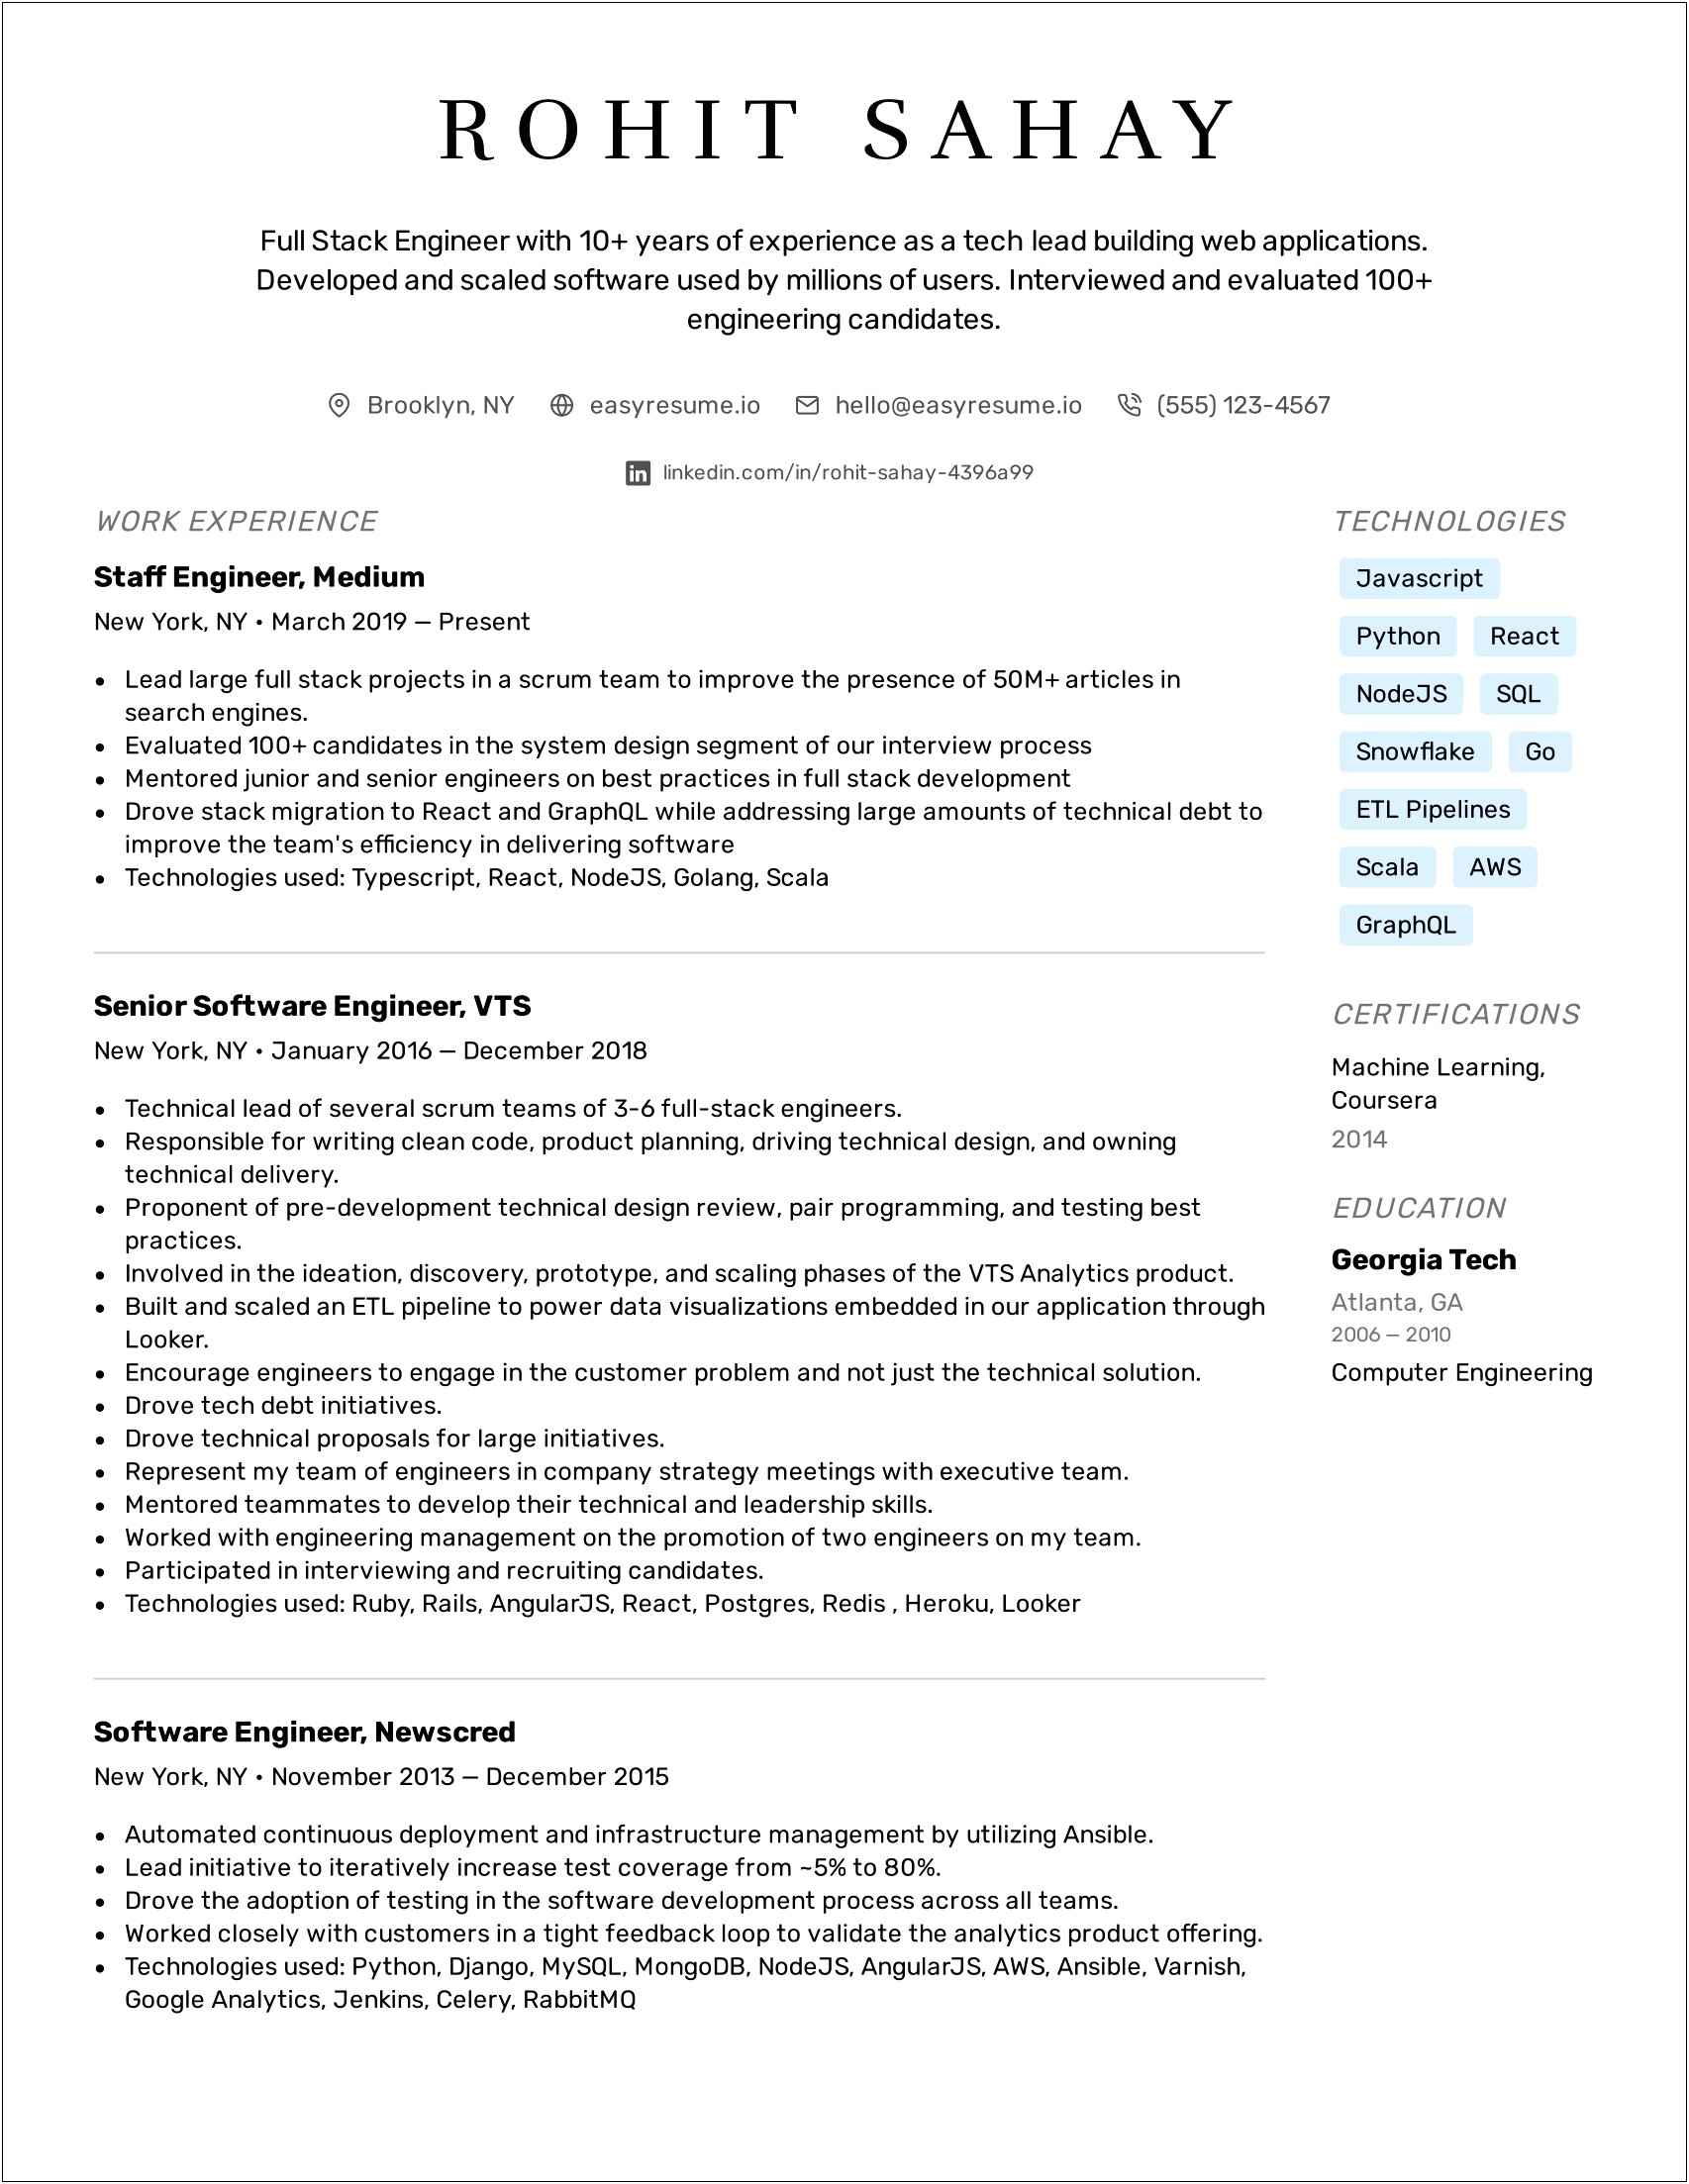 Sample Resumes Showing Experience With Aws